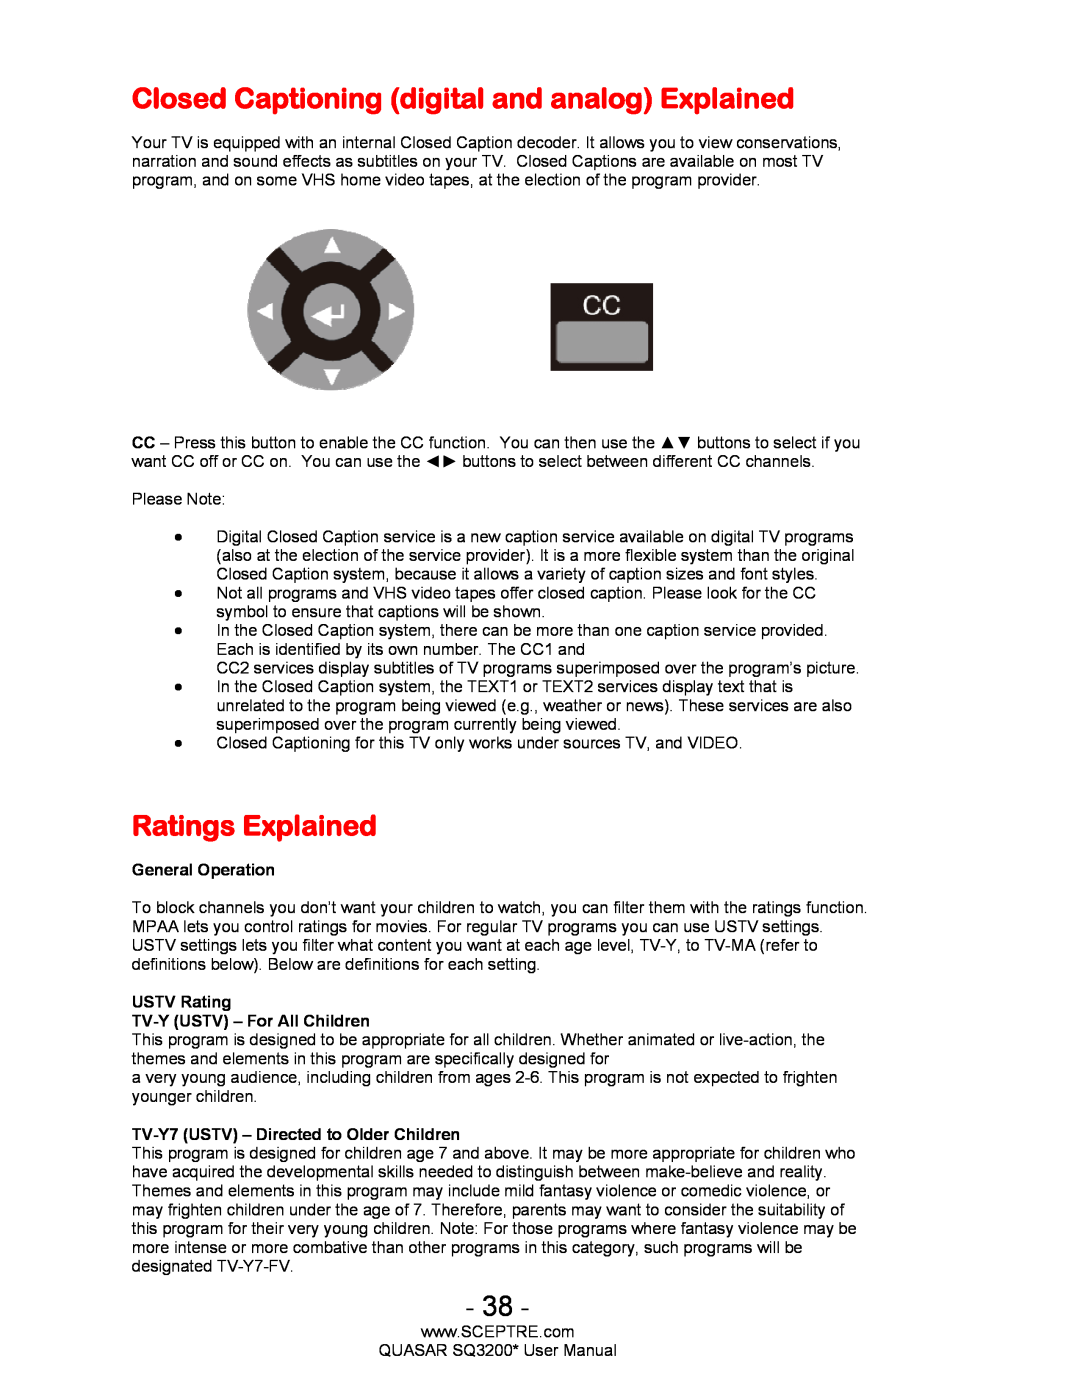 Sceptre Technologies HDTV, SQ3200 Closed Captioning digital and analog Explained, Ratings Explained, General Operation 